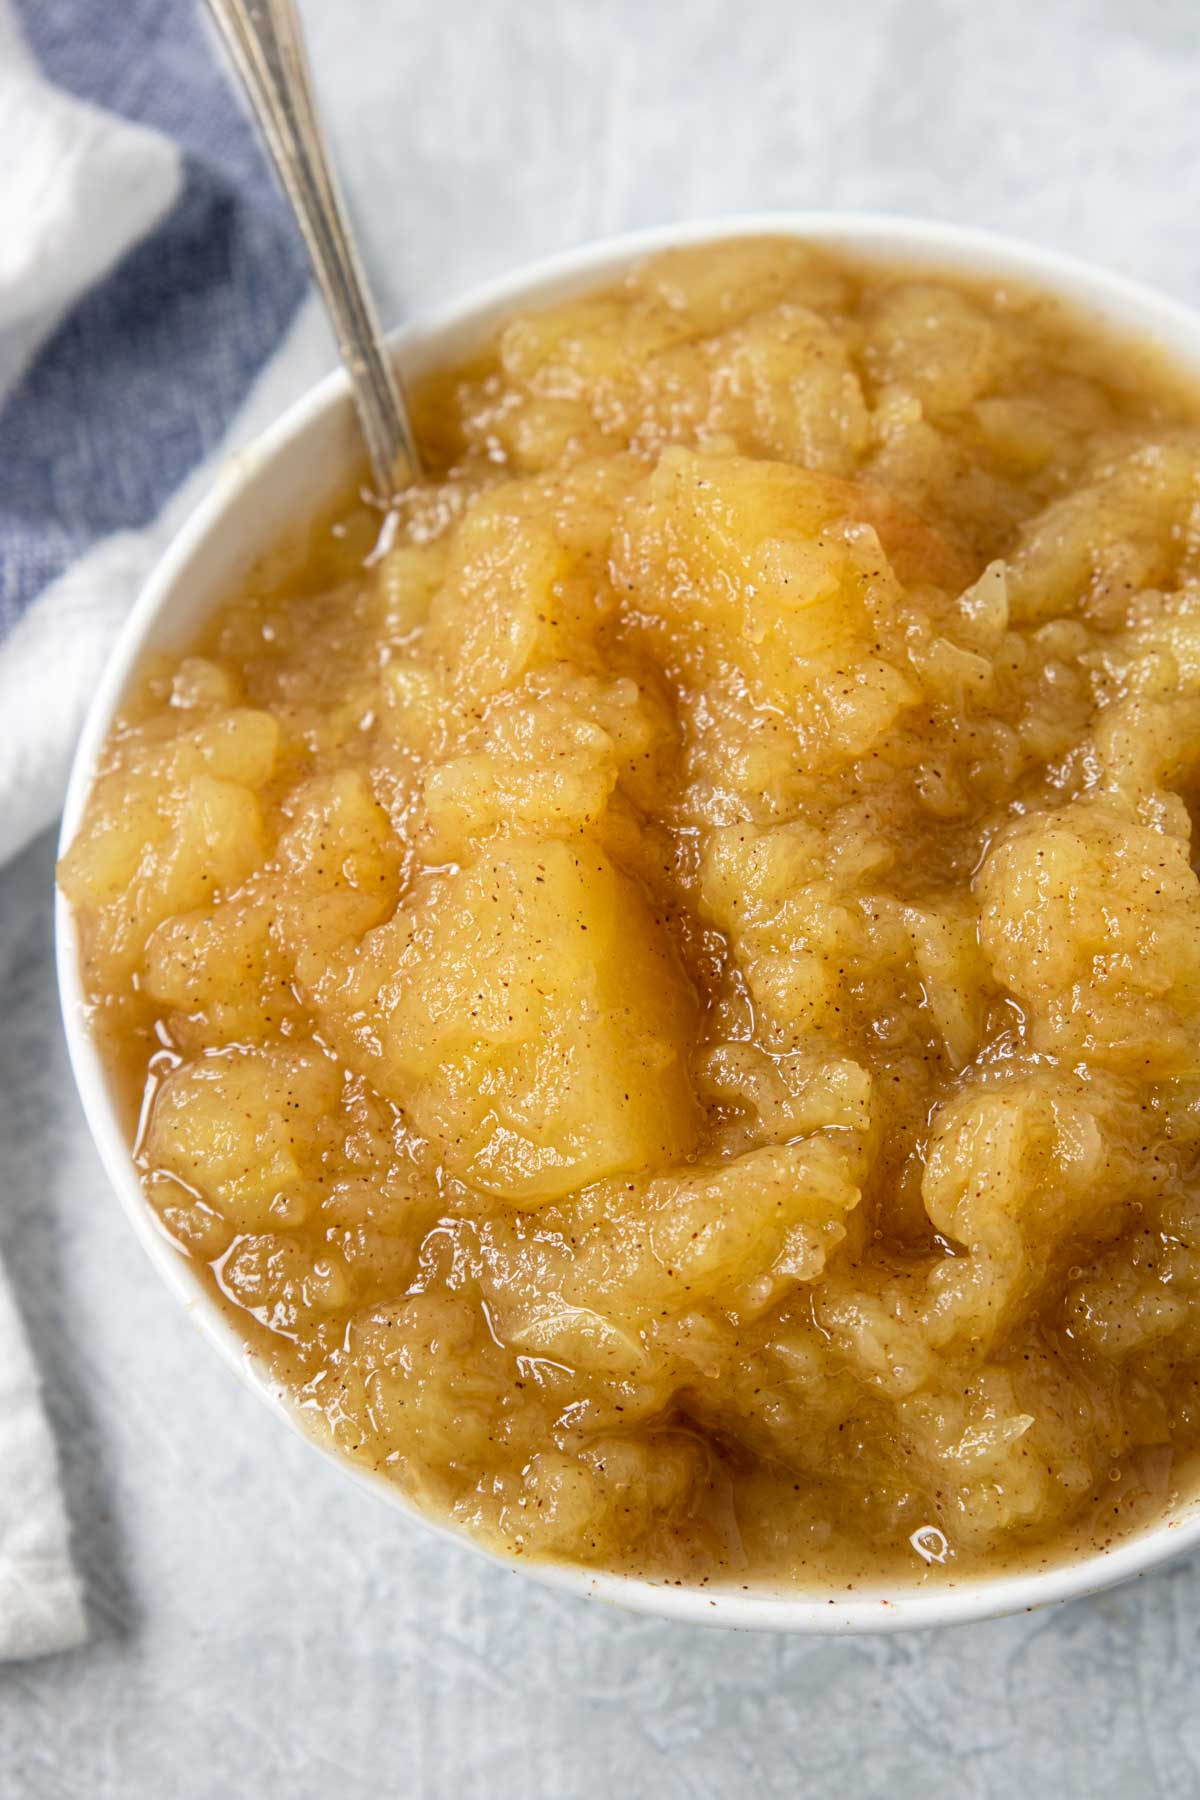 homemade applesauce in a white bowl with a spoon